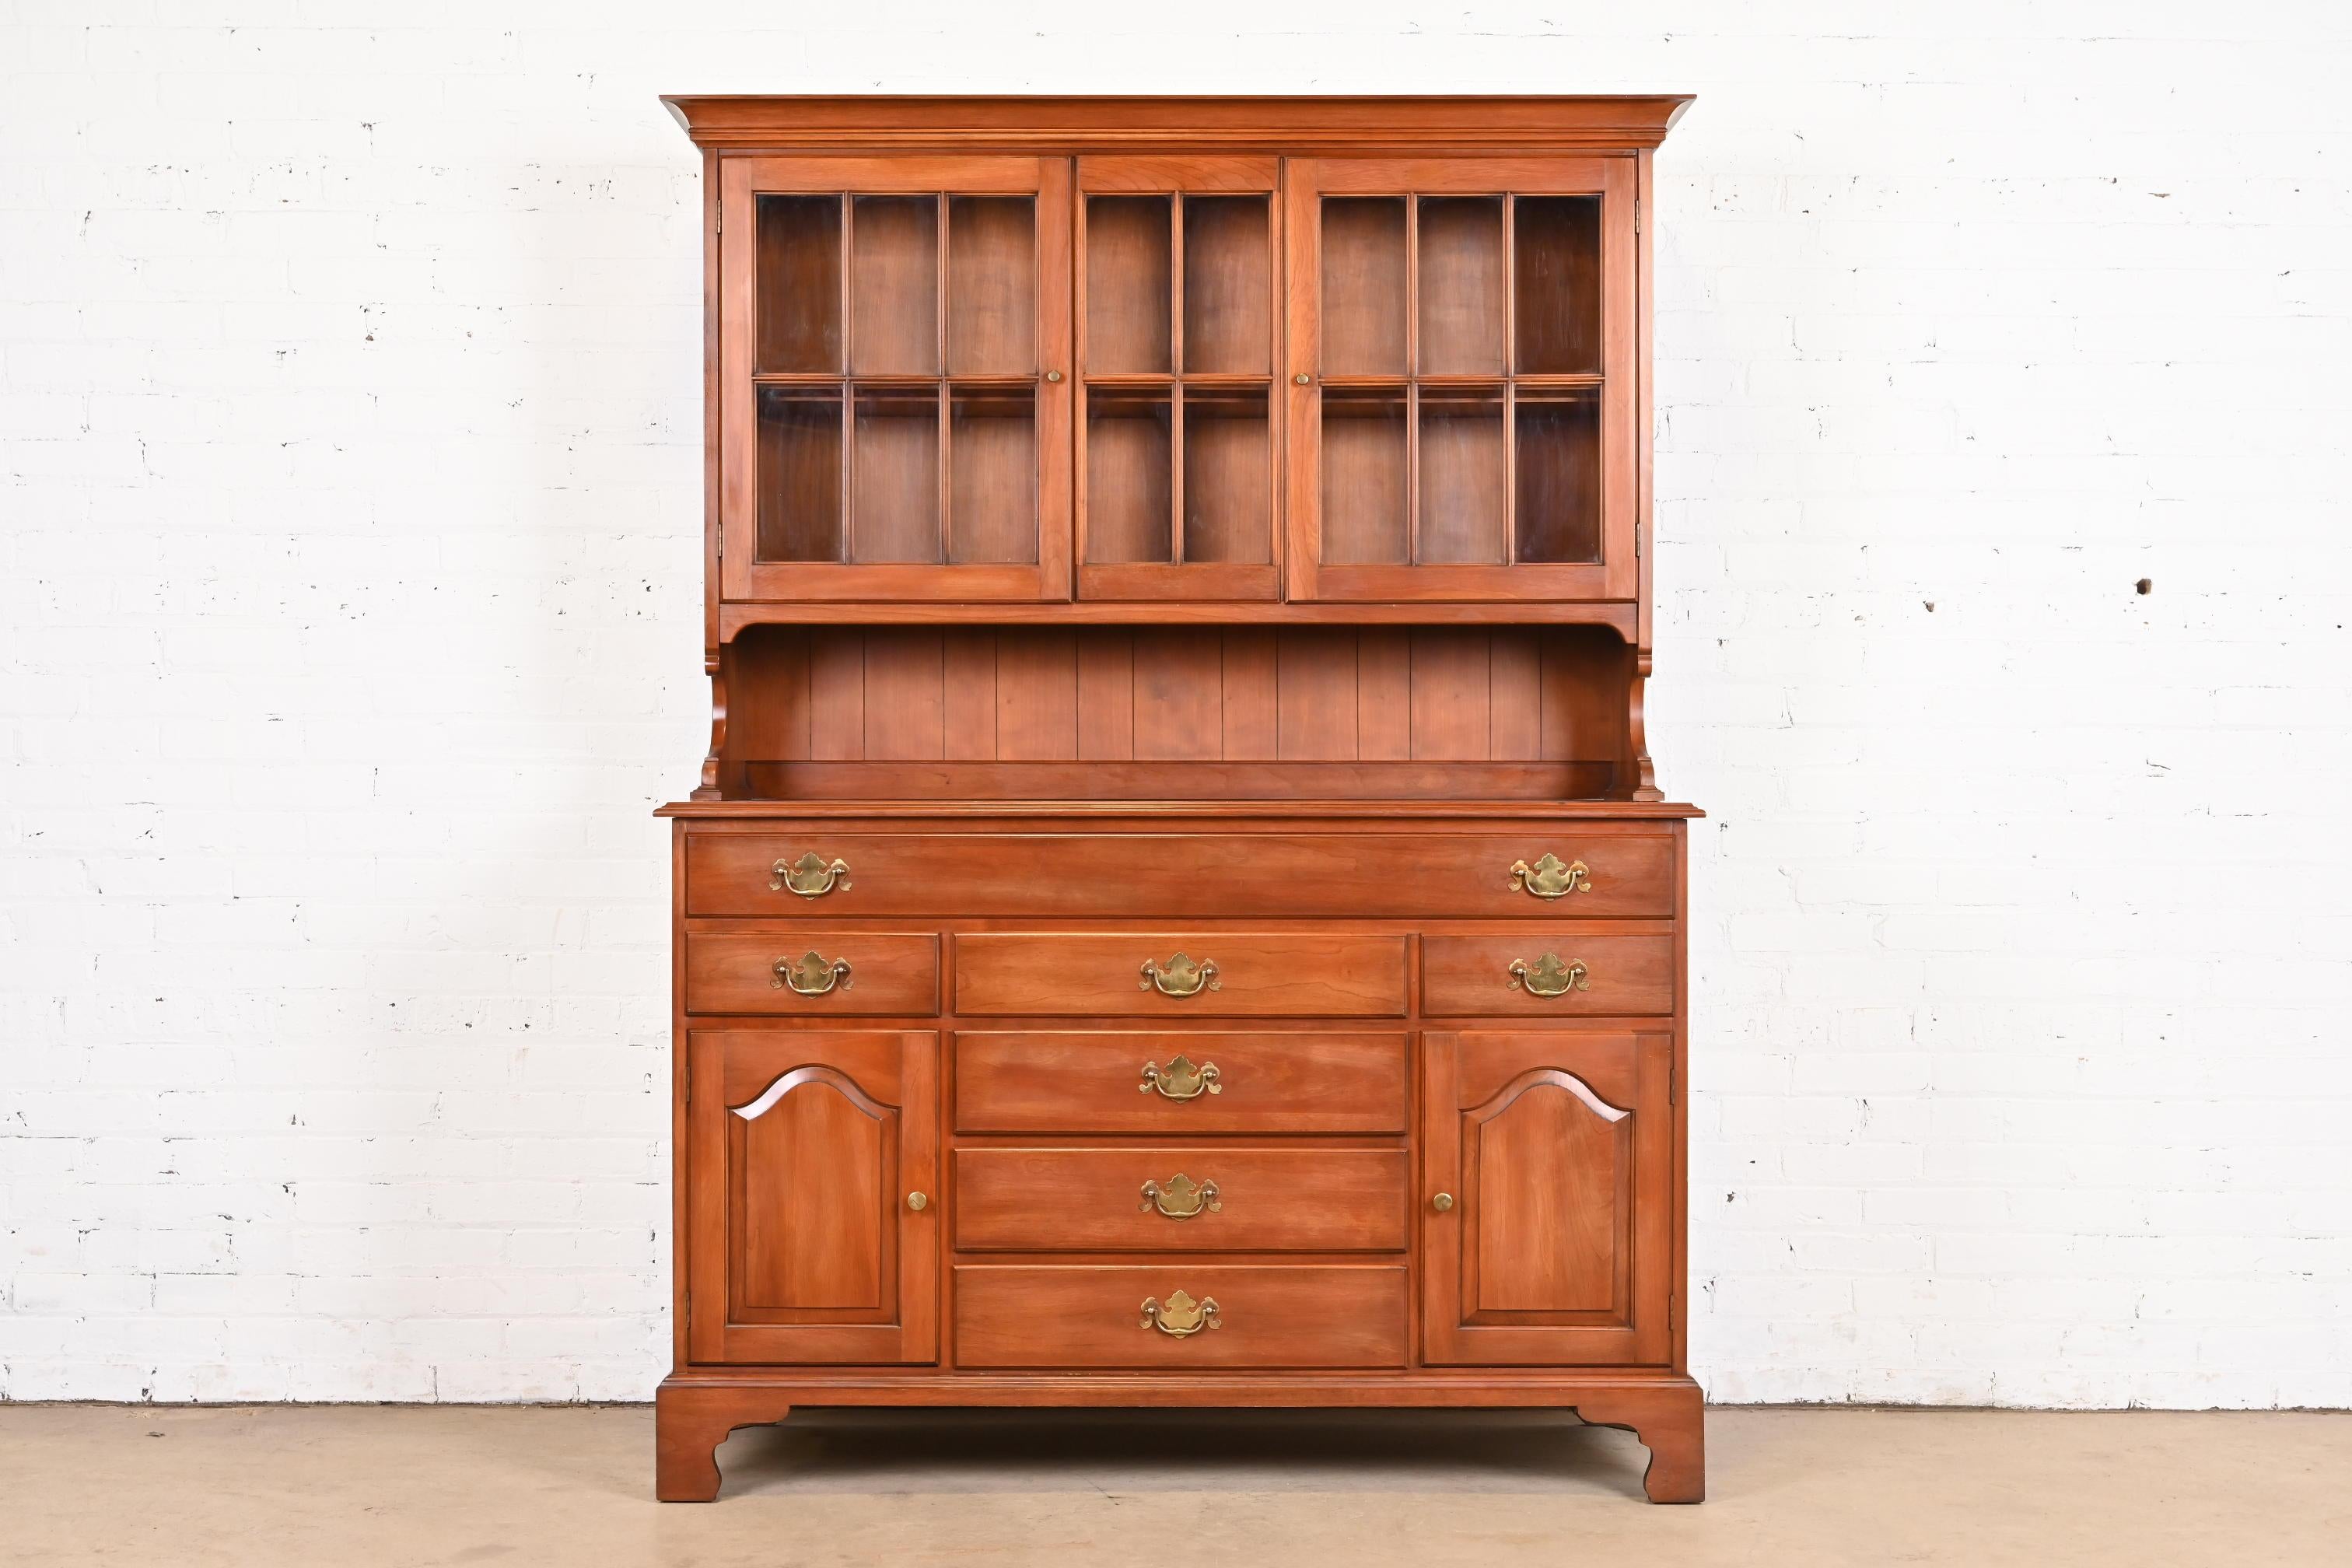 A gorgeous American Colonial or Chippendale style sideboard or buffet server with hutch top

By Henkel Harris

USA, Circa 1970s

Solid wild black cherry wood, with original brass hardware, and glass doors.

Measures: 55.75